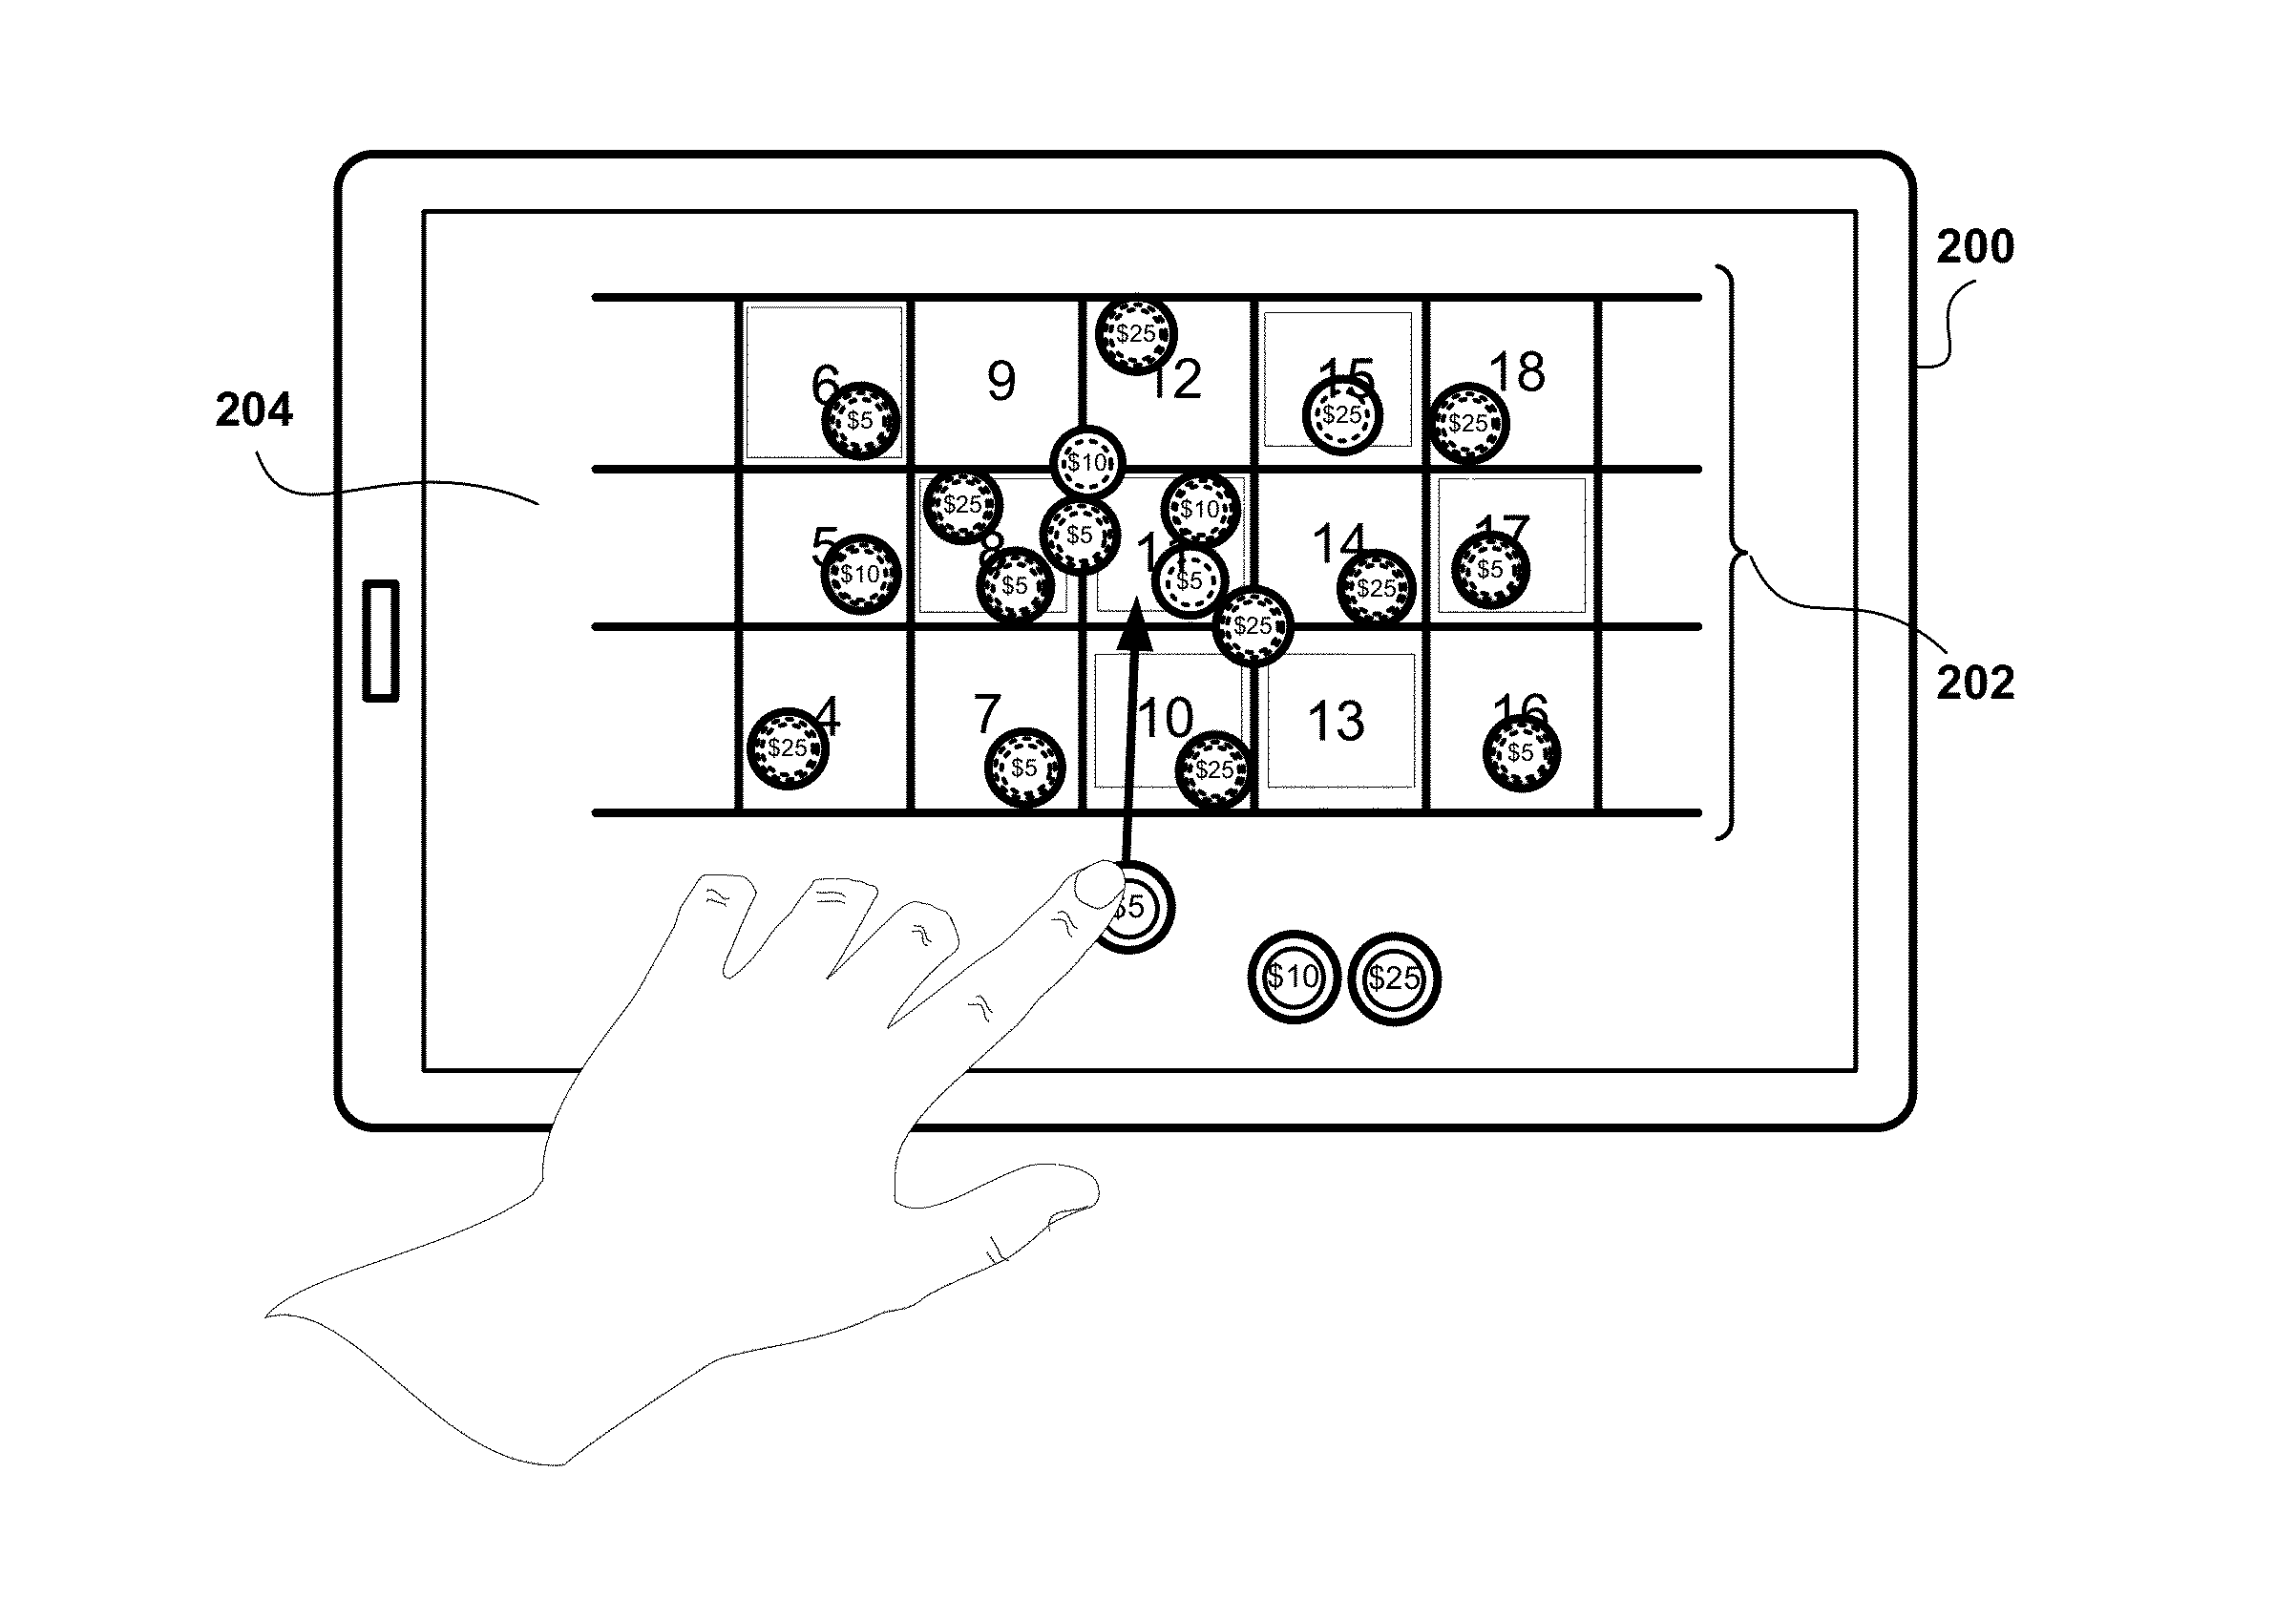 Methods and systems for magnifying selection windows in roulette games and accessing custom wagering profiles